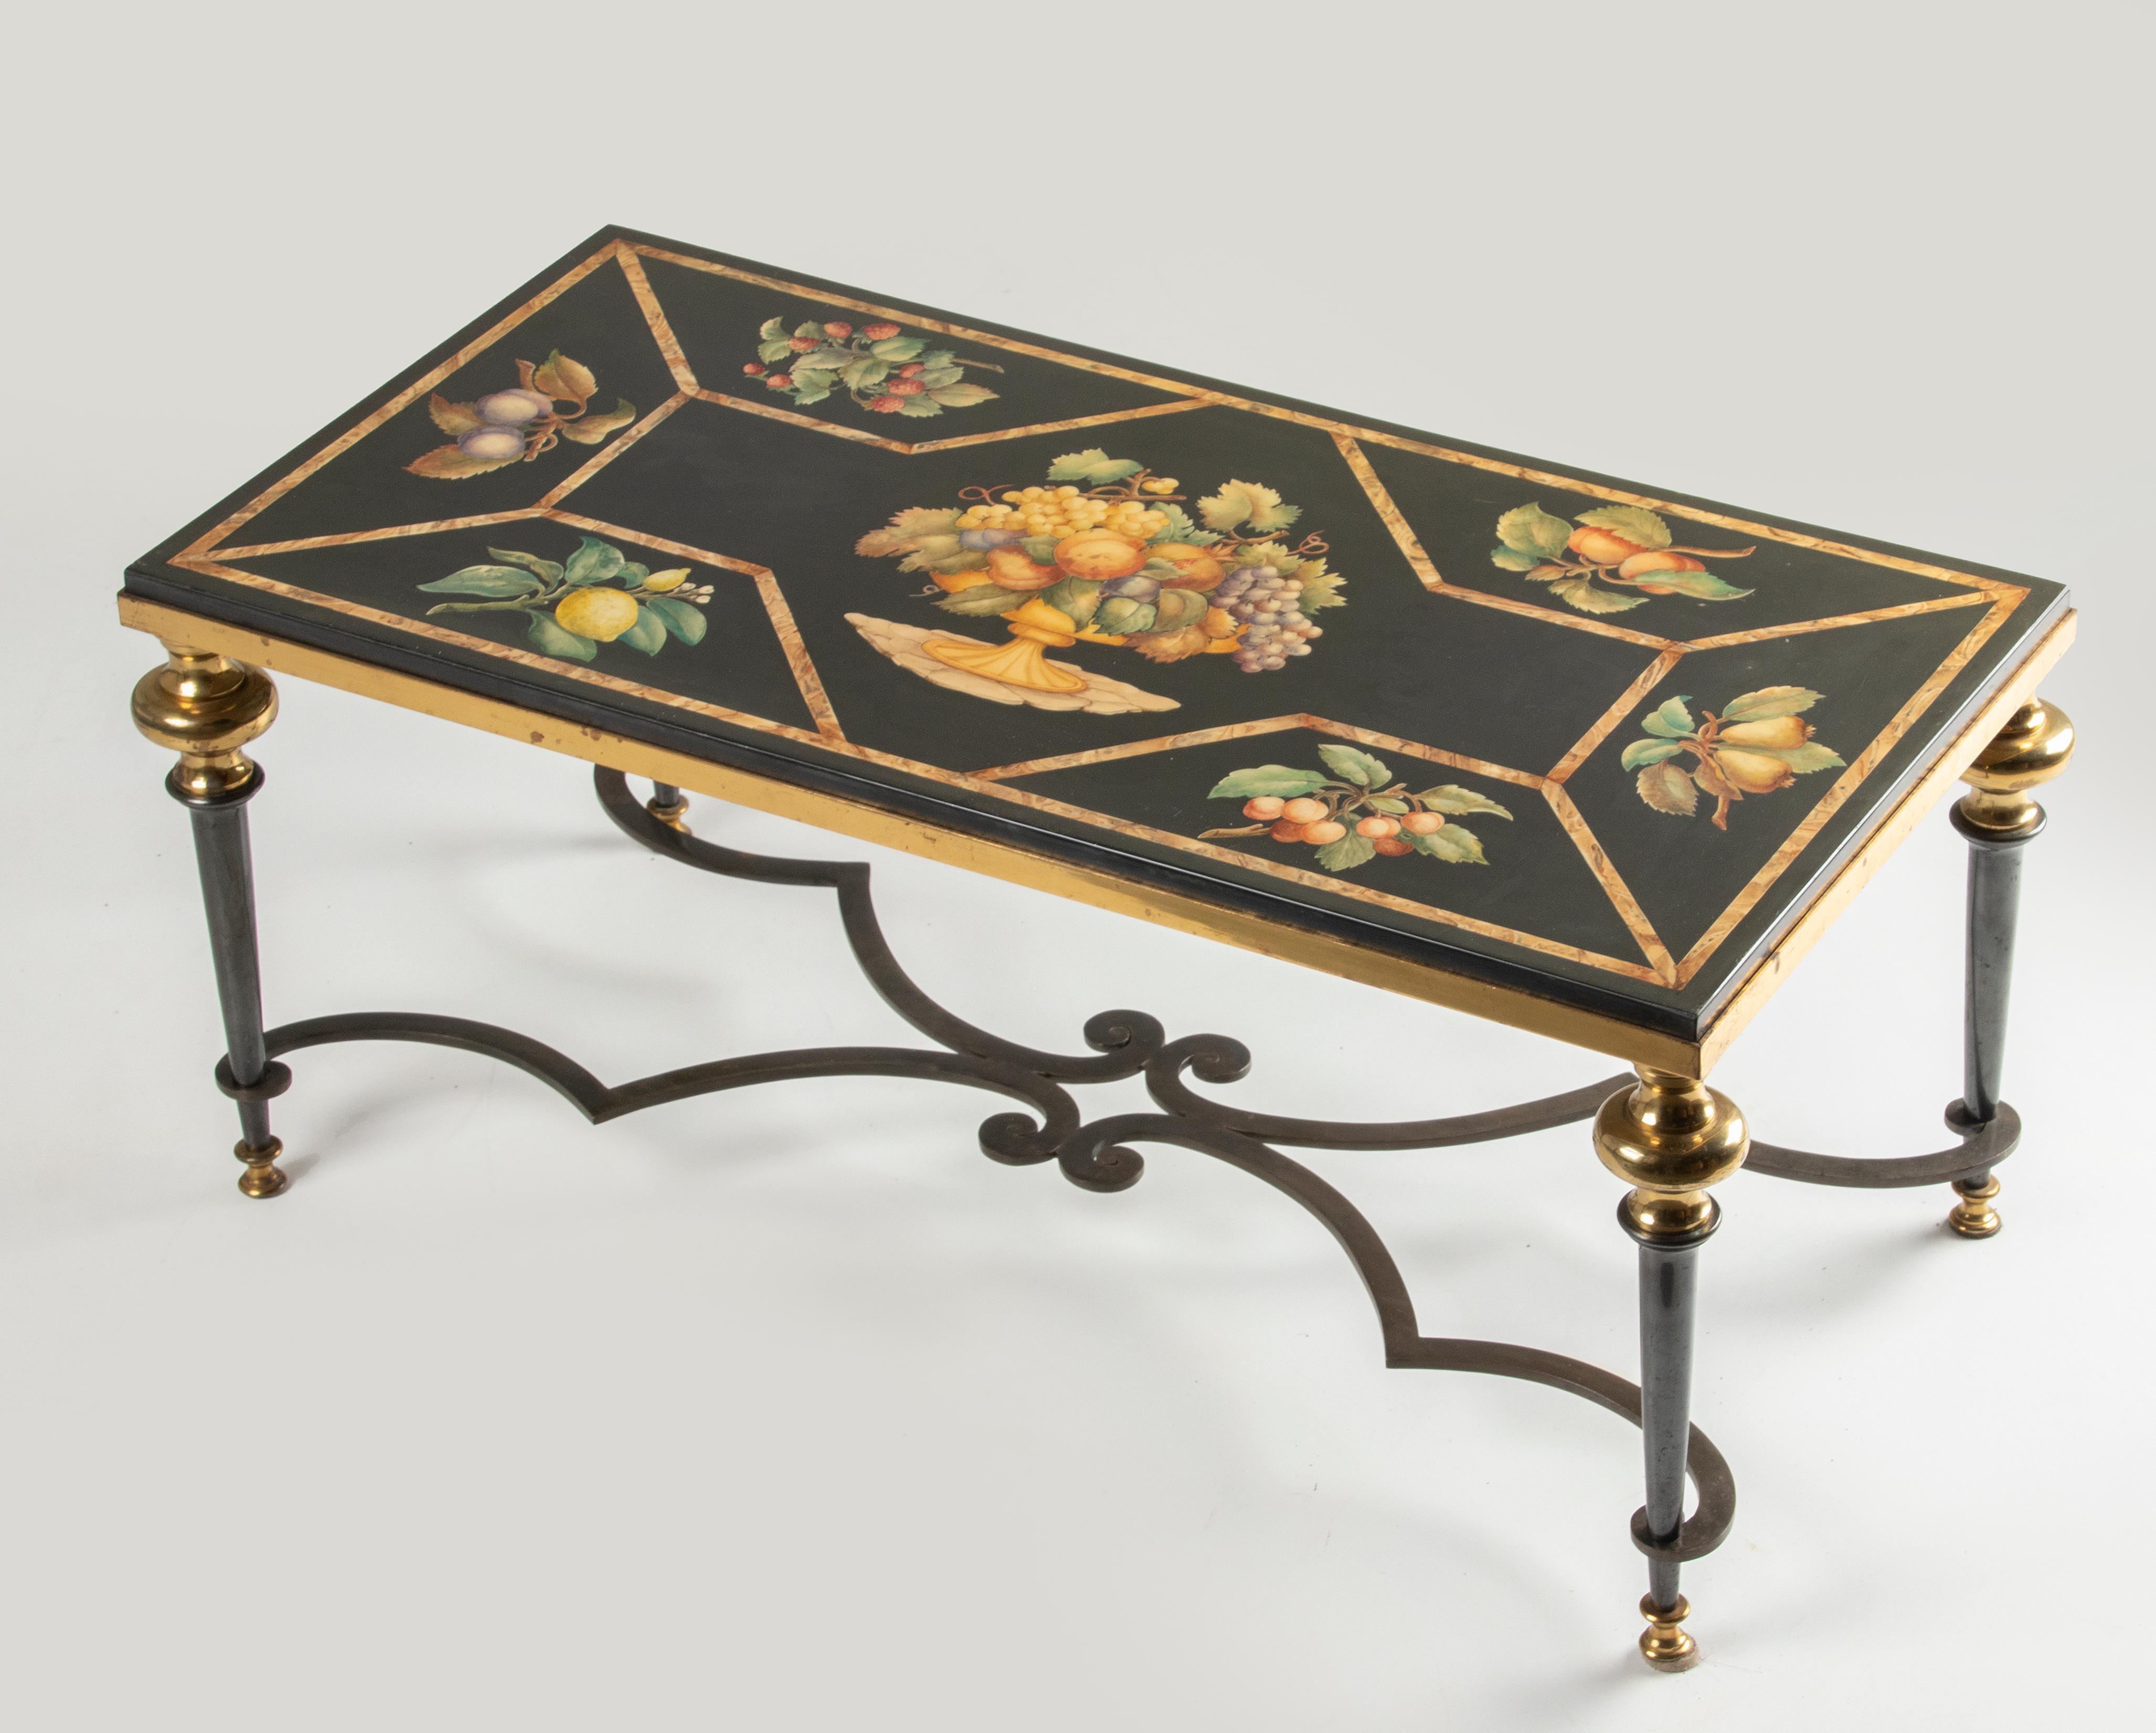 A late 20th century Italian Scagliola coffee table with marble top, resting on a heavy solid iron base, black patinated with brass accents. The marble top depicting several fruits, in the center a fruitbowl. The inlayment is hand crafted with